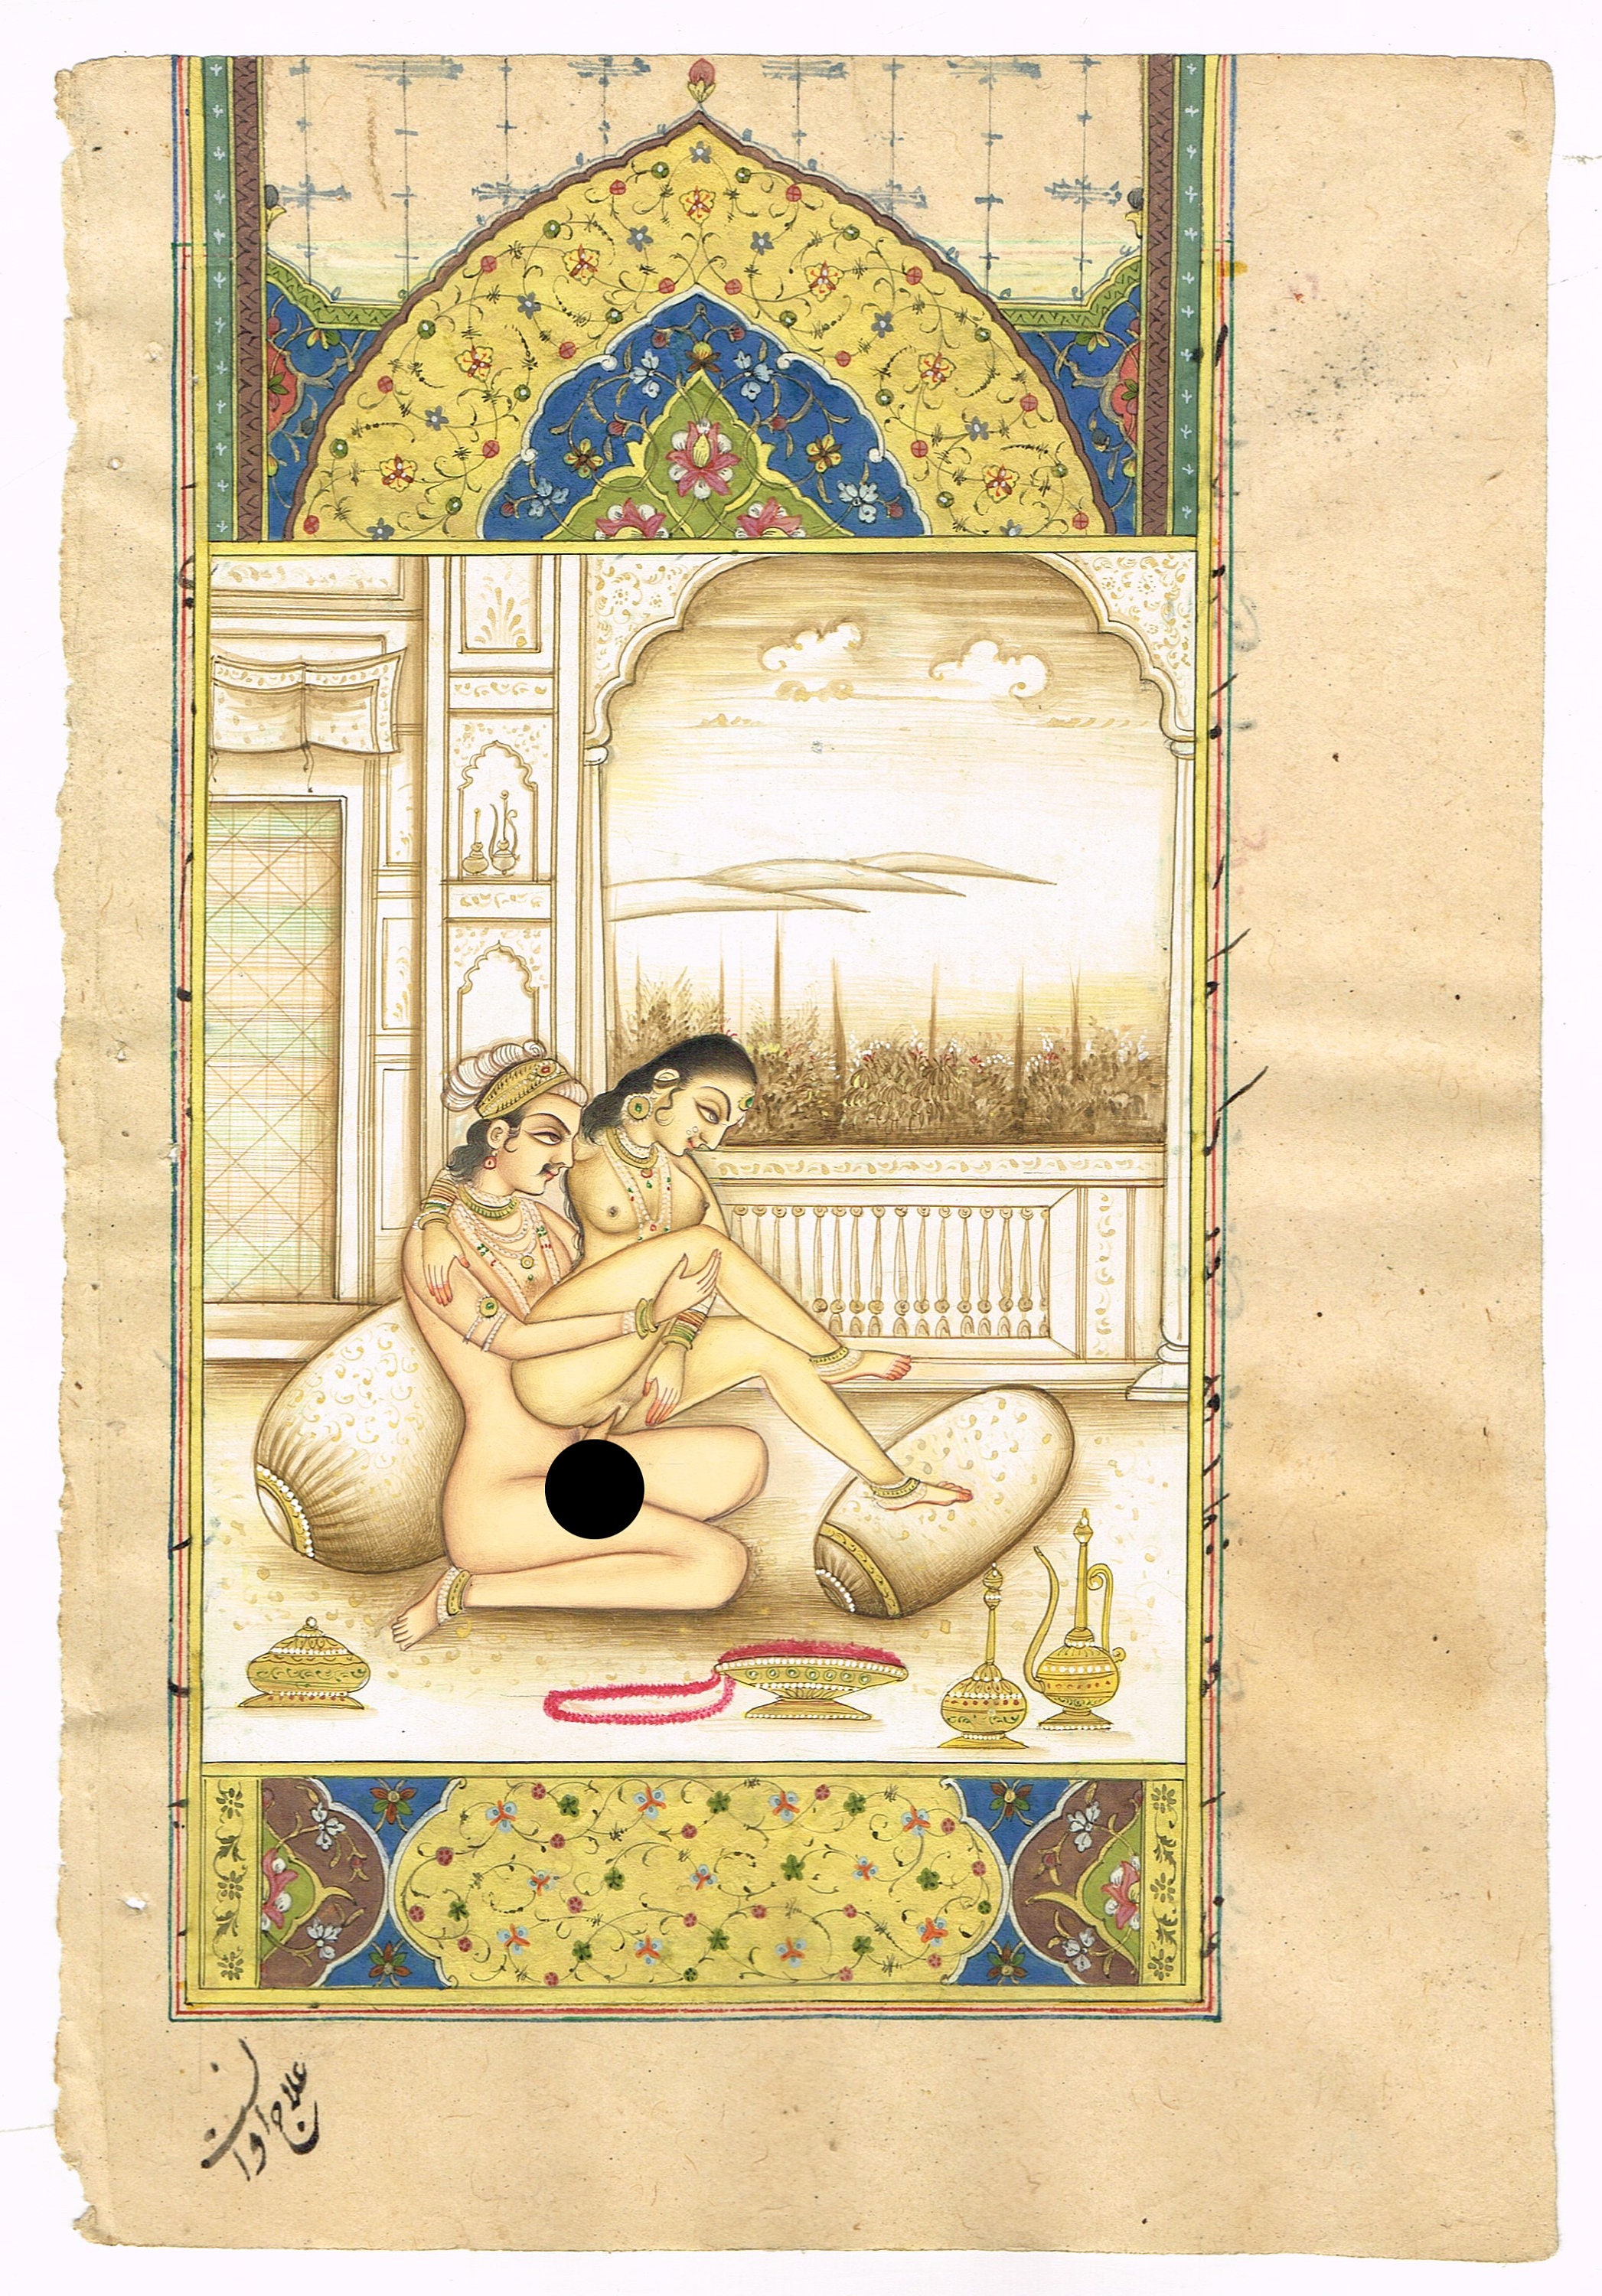 Kamsutra Share Price - Indian Vintage Kamasutra Art Painting on Paper 6.5x9.5 Inches - Etsy Norway